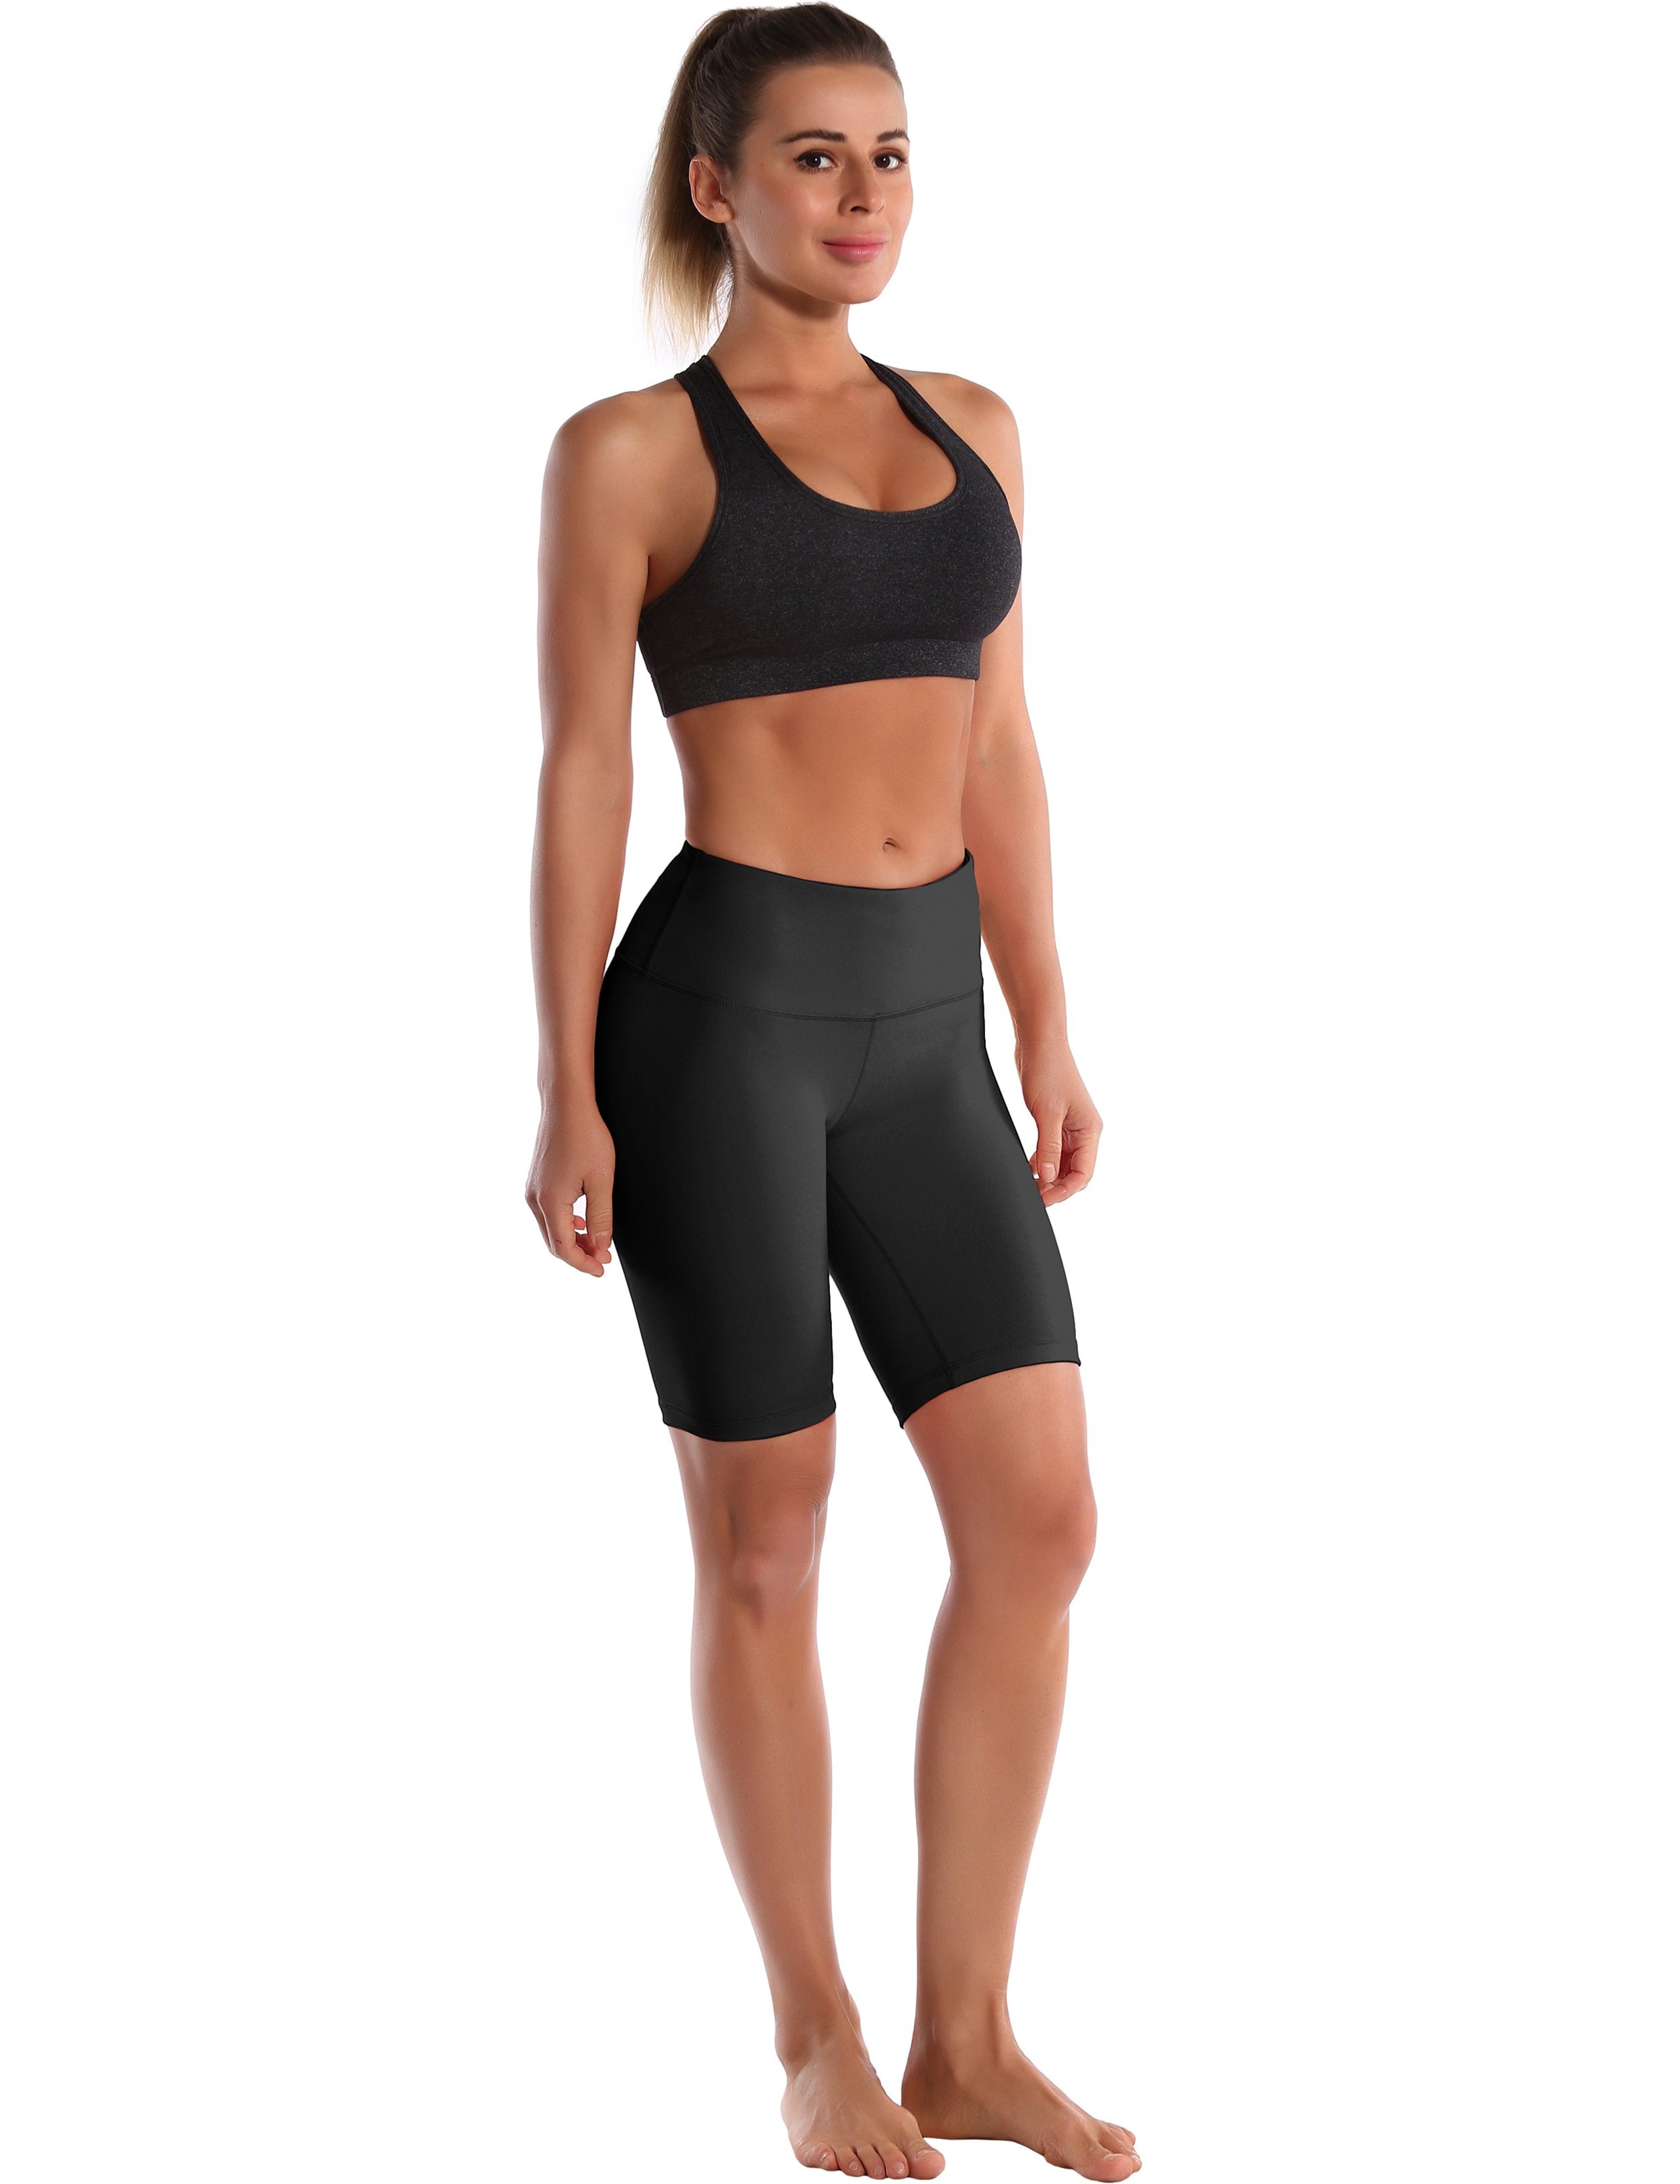 8" High Waist Yoga Shorts black Sleek, soft, smooth and totally comfortable: our newest style is here. Softest-ever fabric High elasticity High density 4-way stretch Fabric doesn't attract lint easily No see-through Moisture-wicking Machine wash 75% Nylon, 25% Spandex